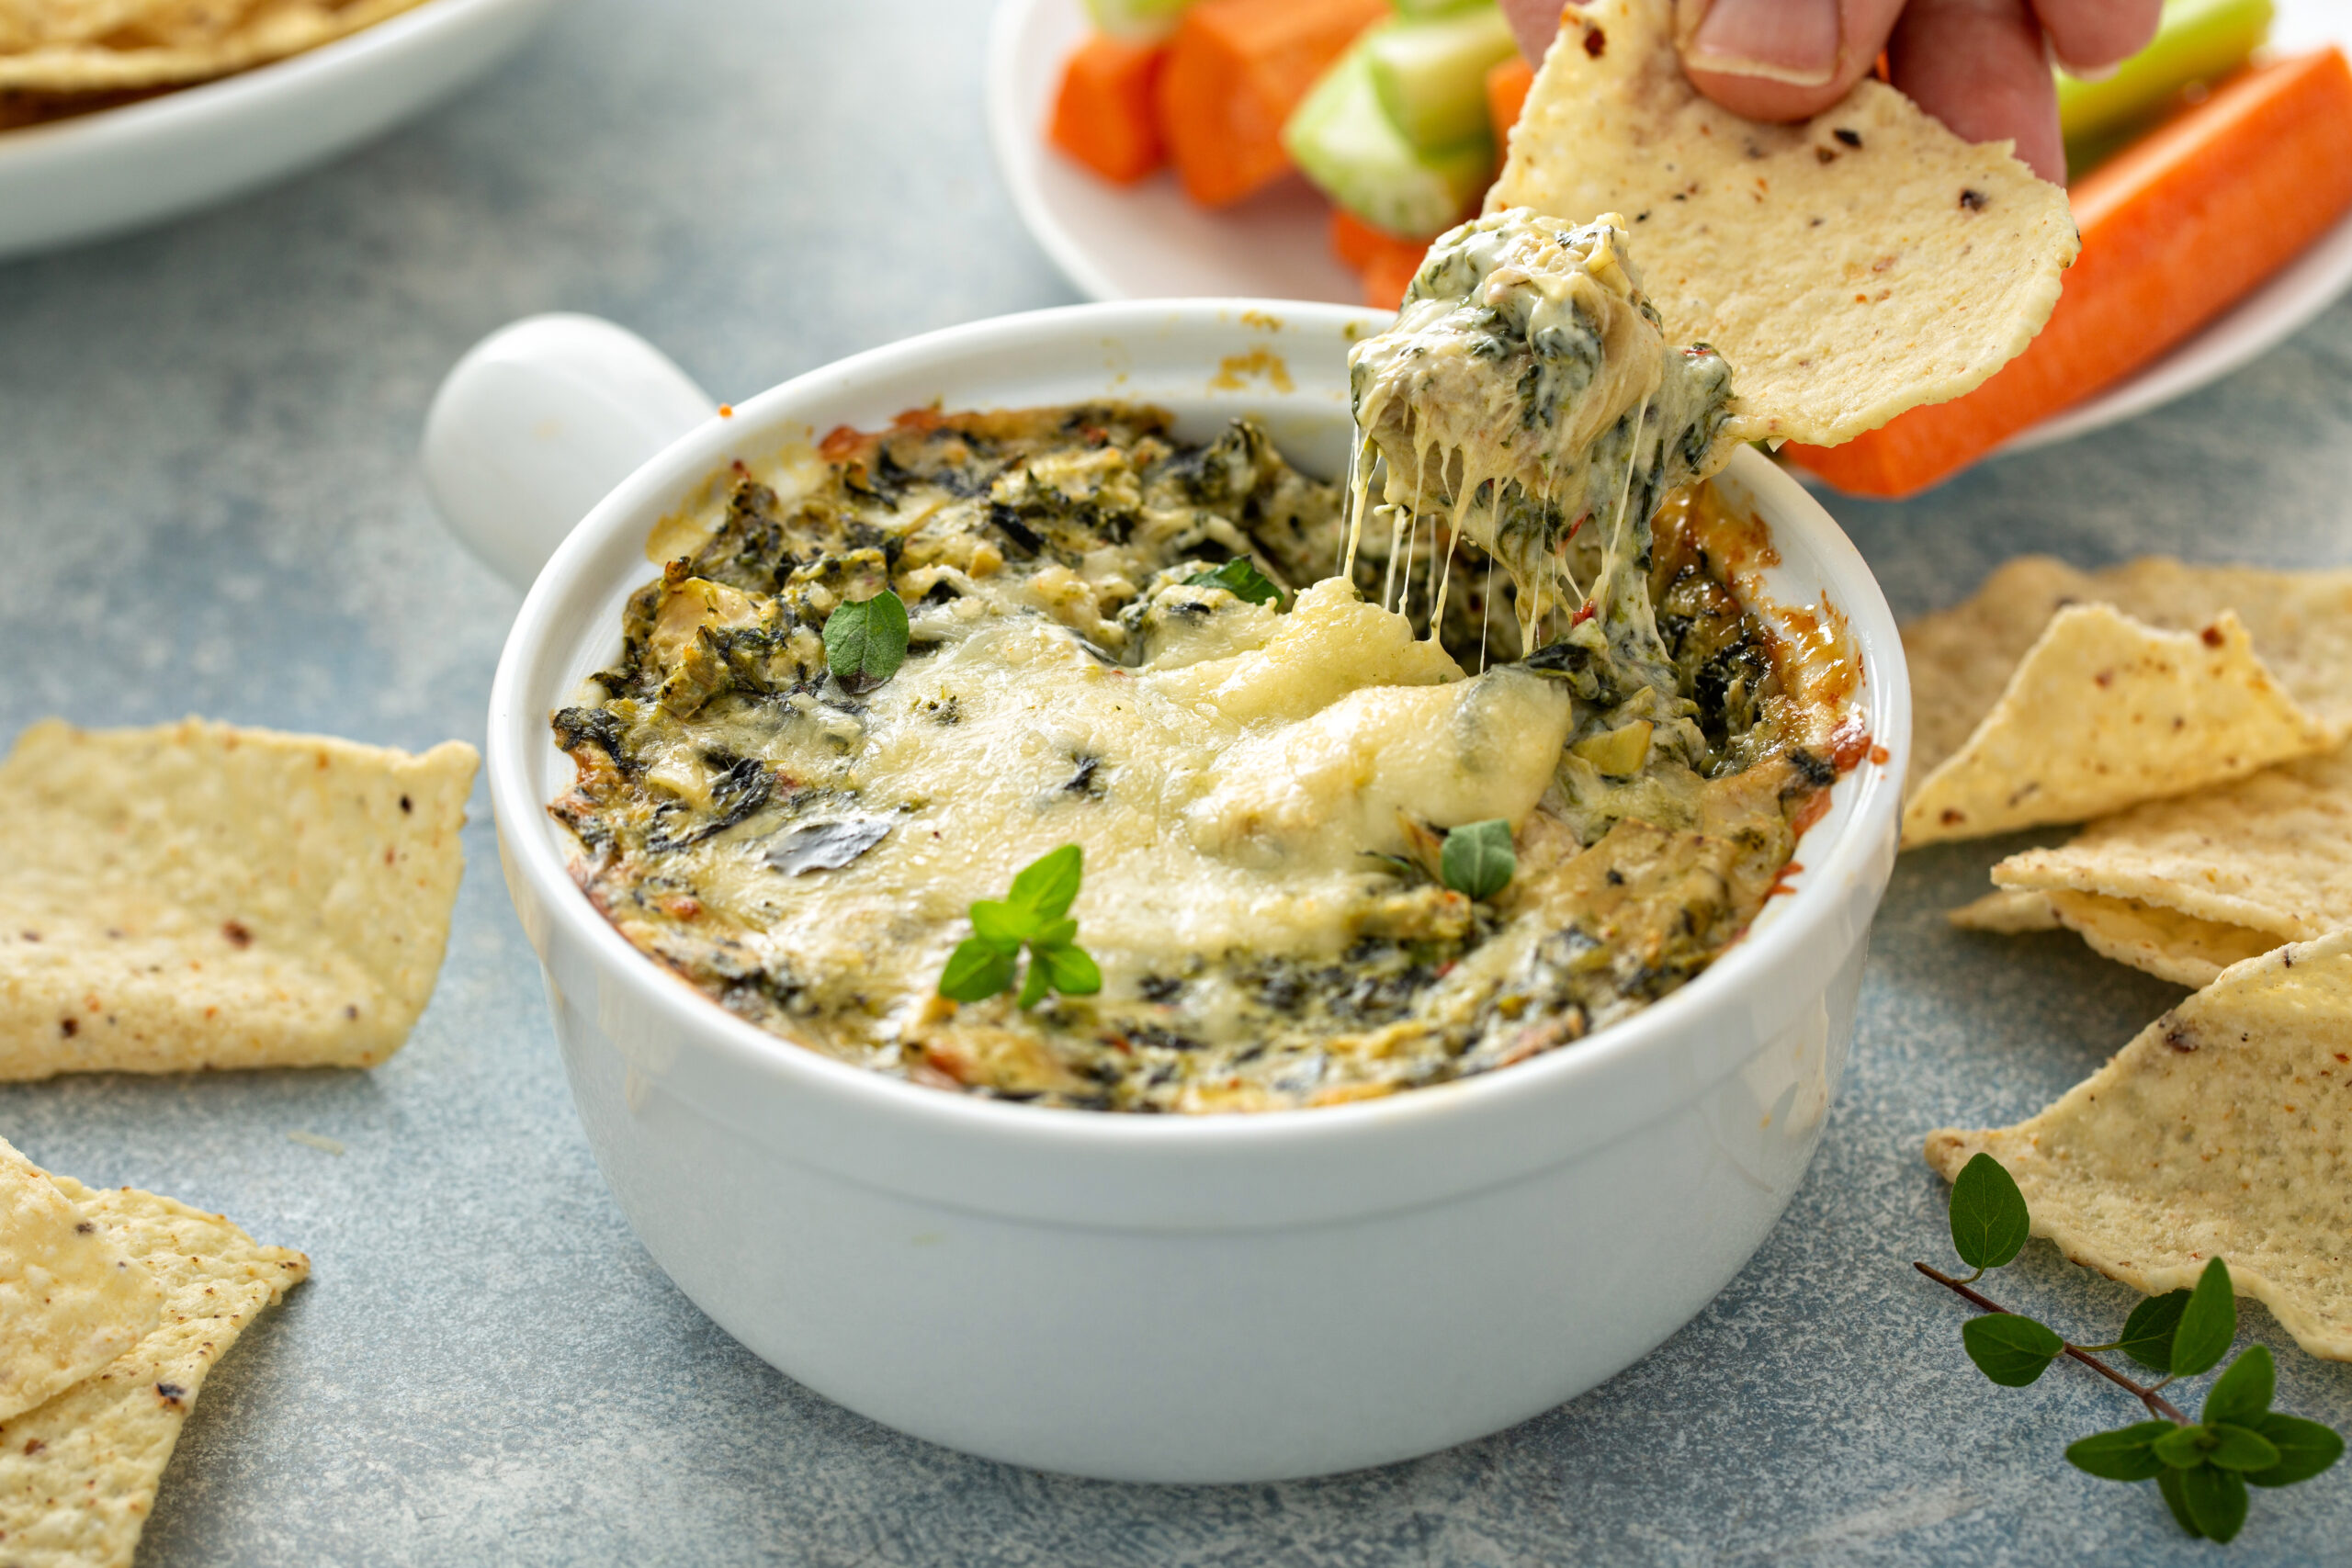 Featured image for “Spinach Artichoke Dip”